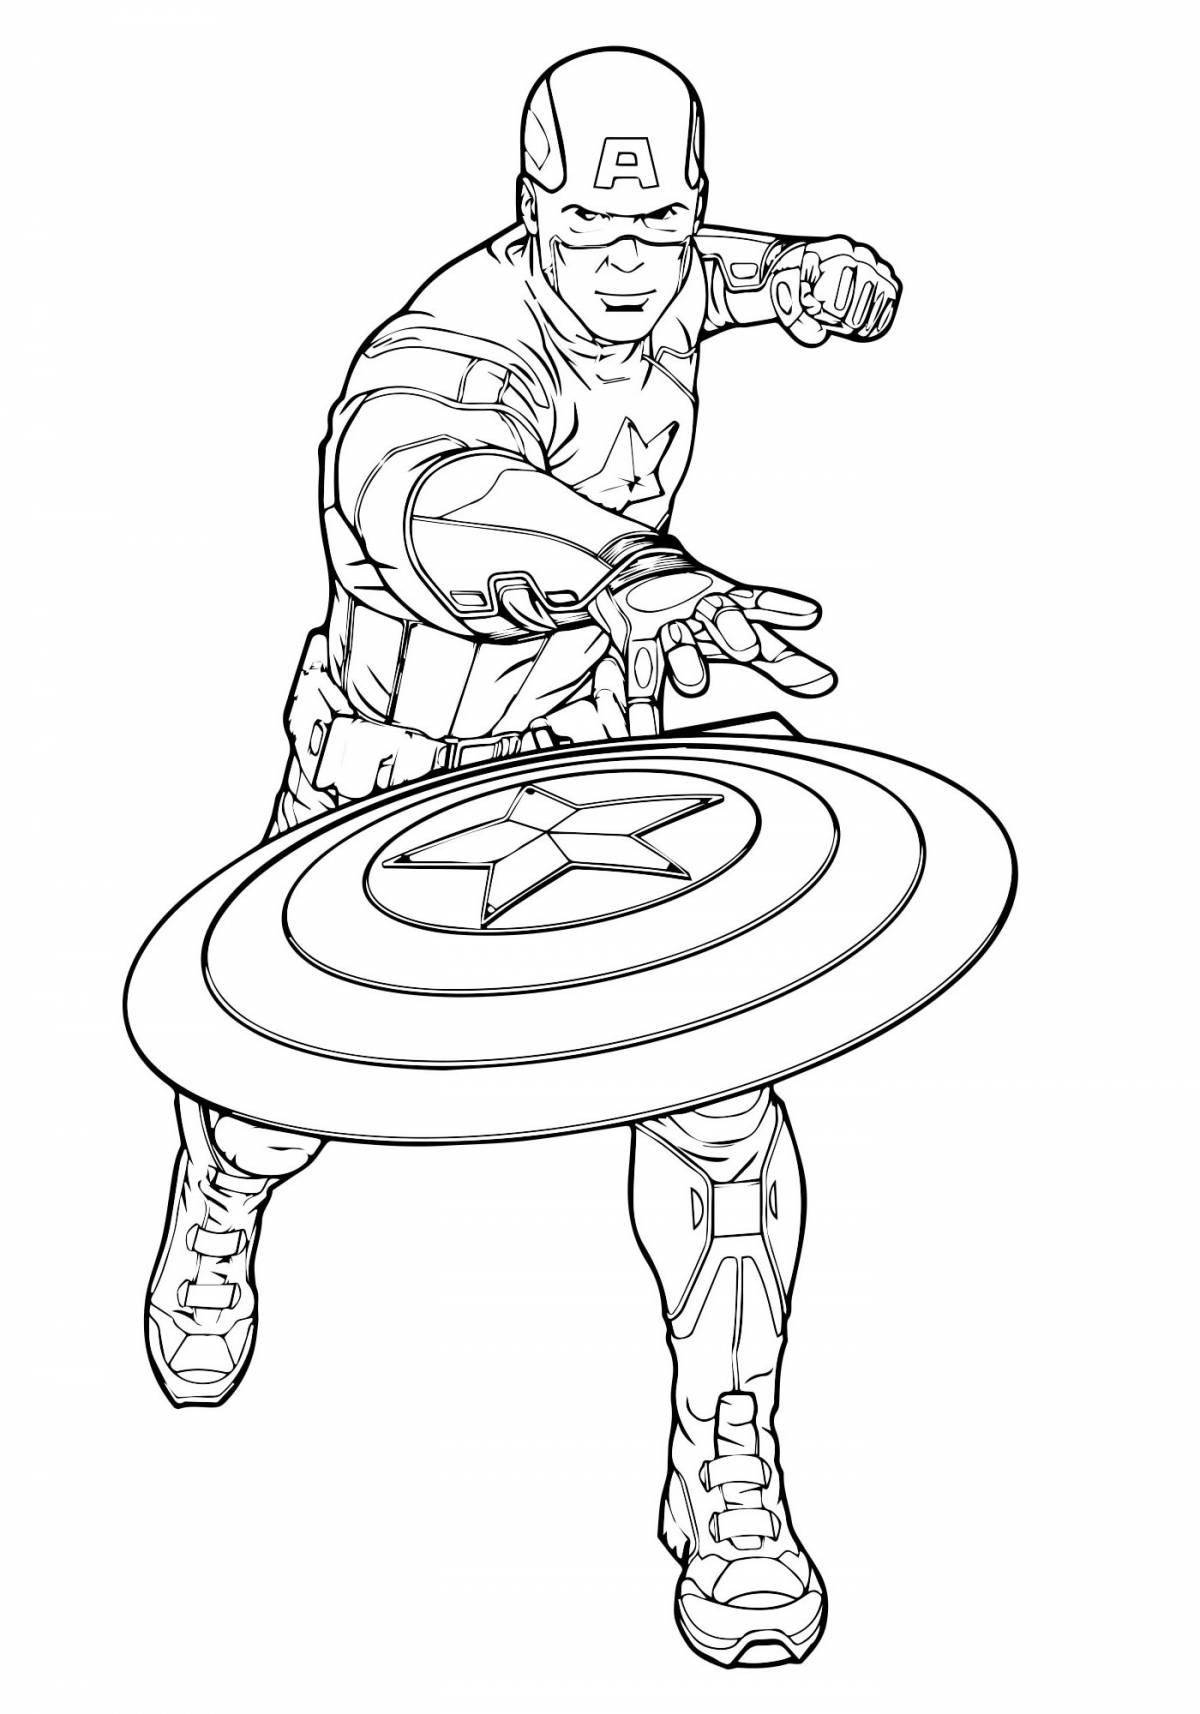 Coloring page shining captain